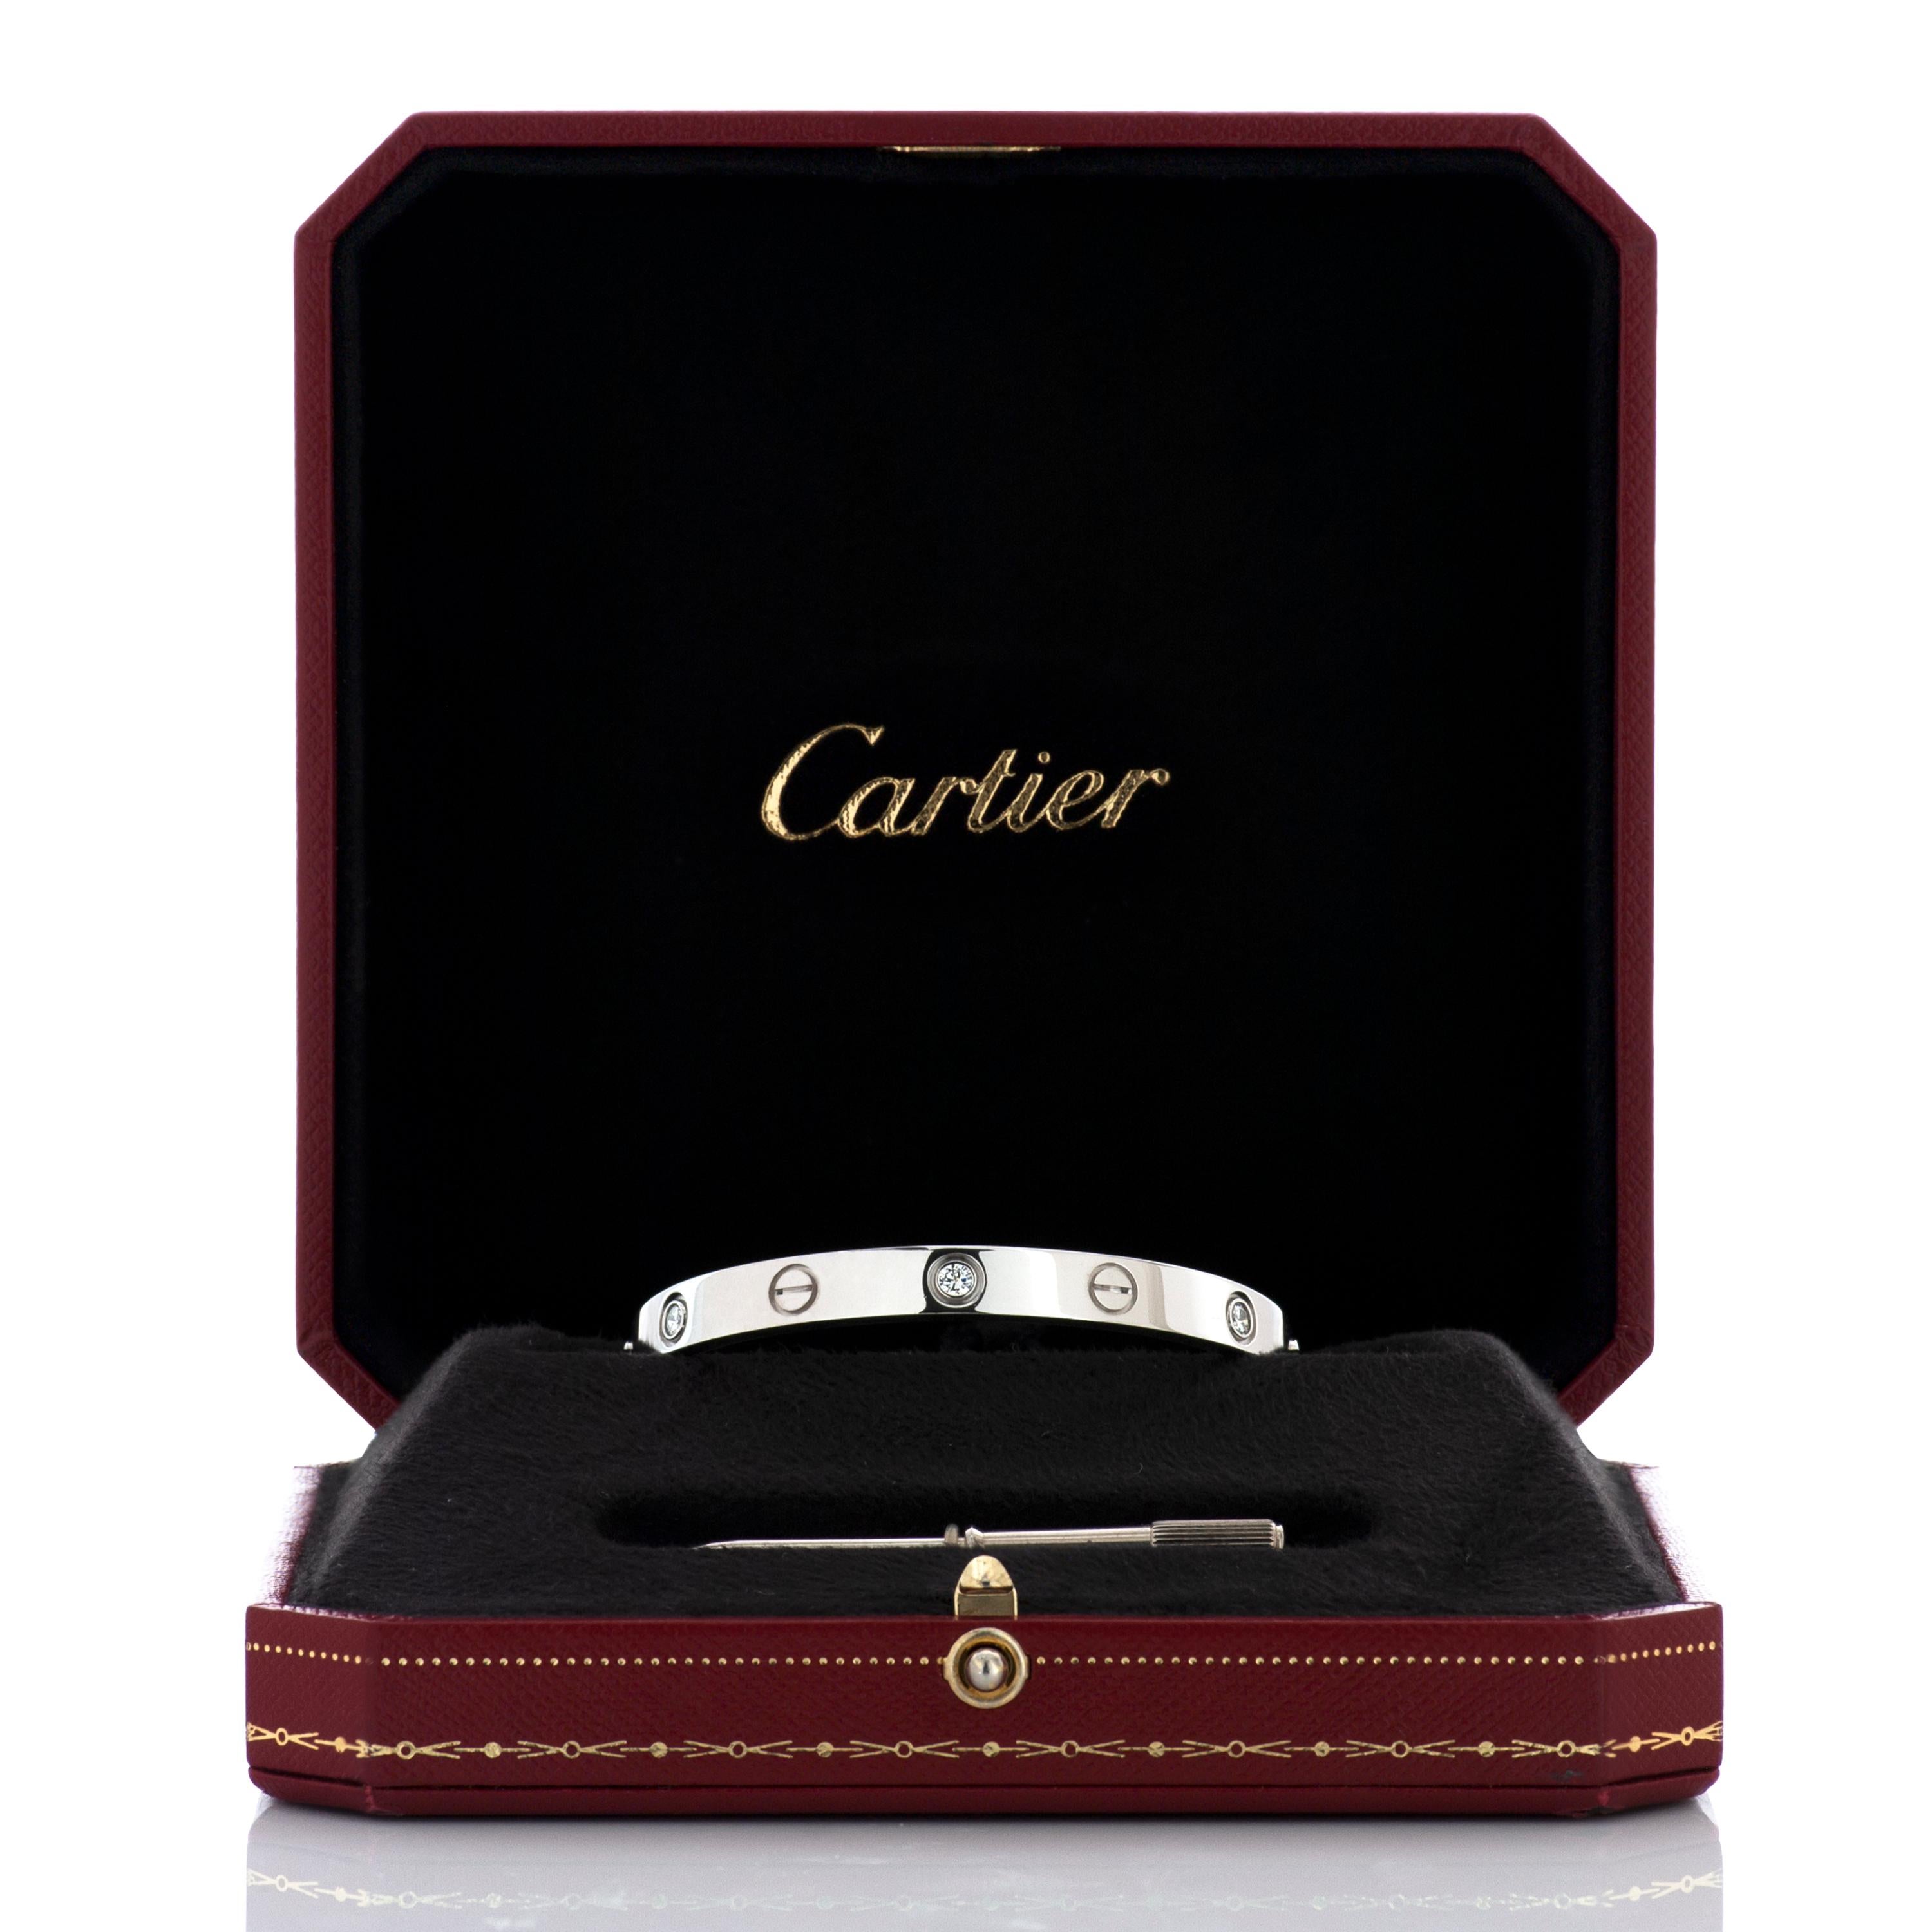 Cartier love bracelet featuring 6 round diamonds in 18k white gold, accompanied by screwdriver and Cartier box.

Size 16, 6.1mm wide.  

Numbered and signed 